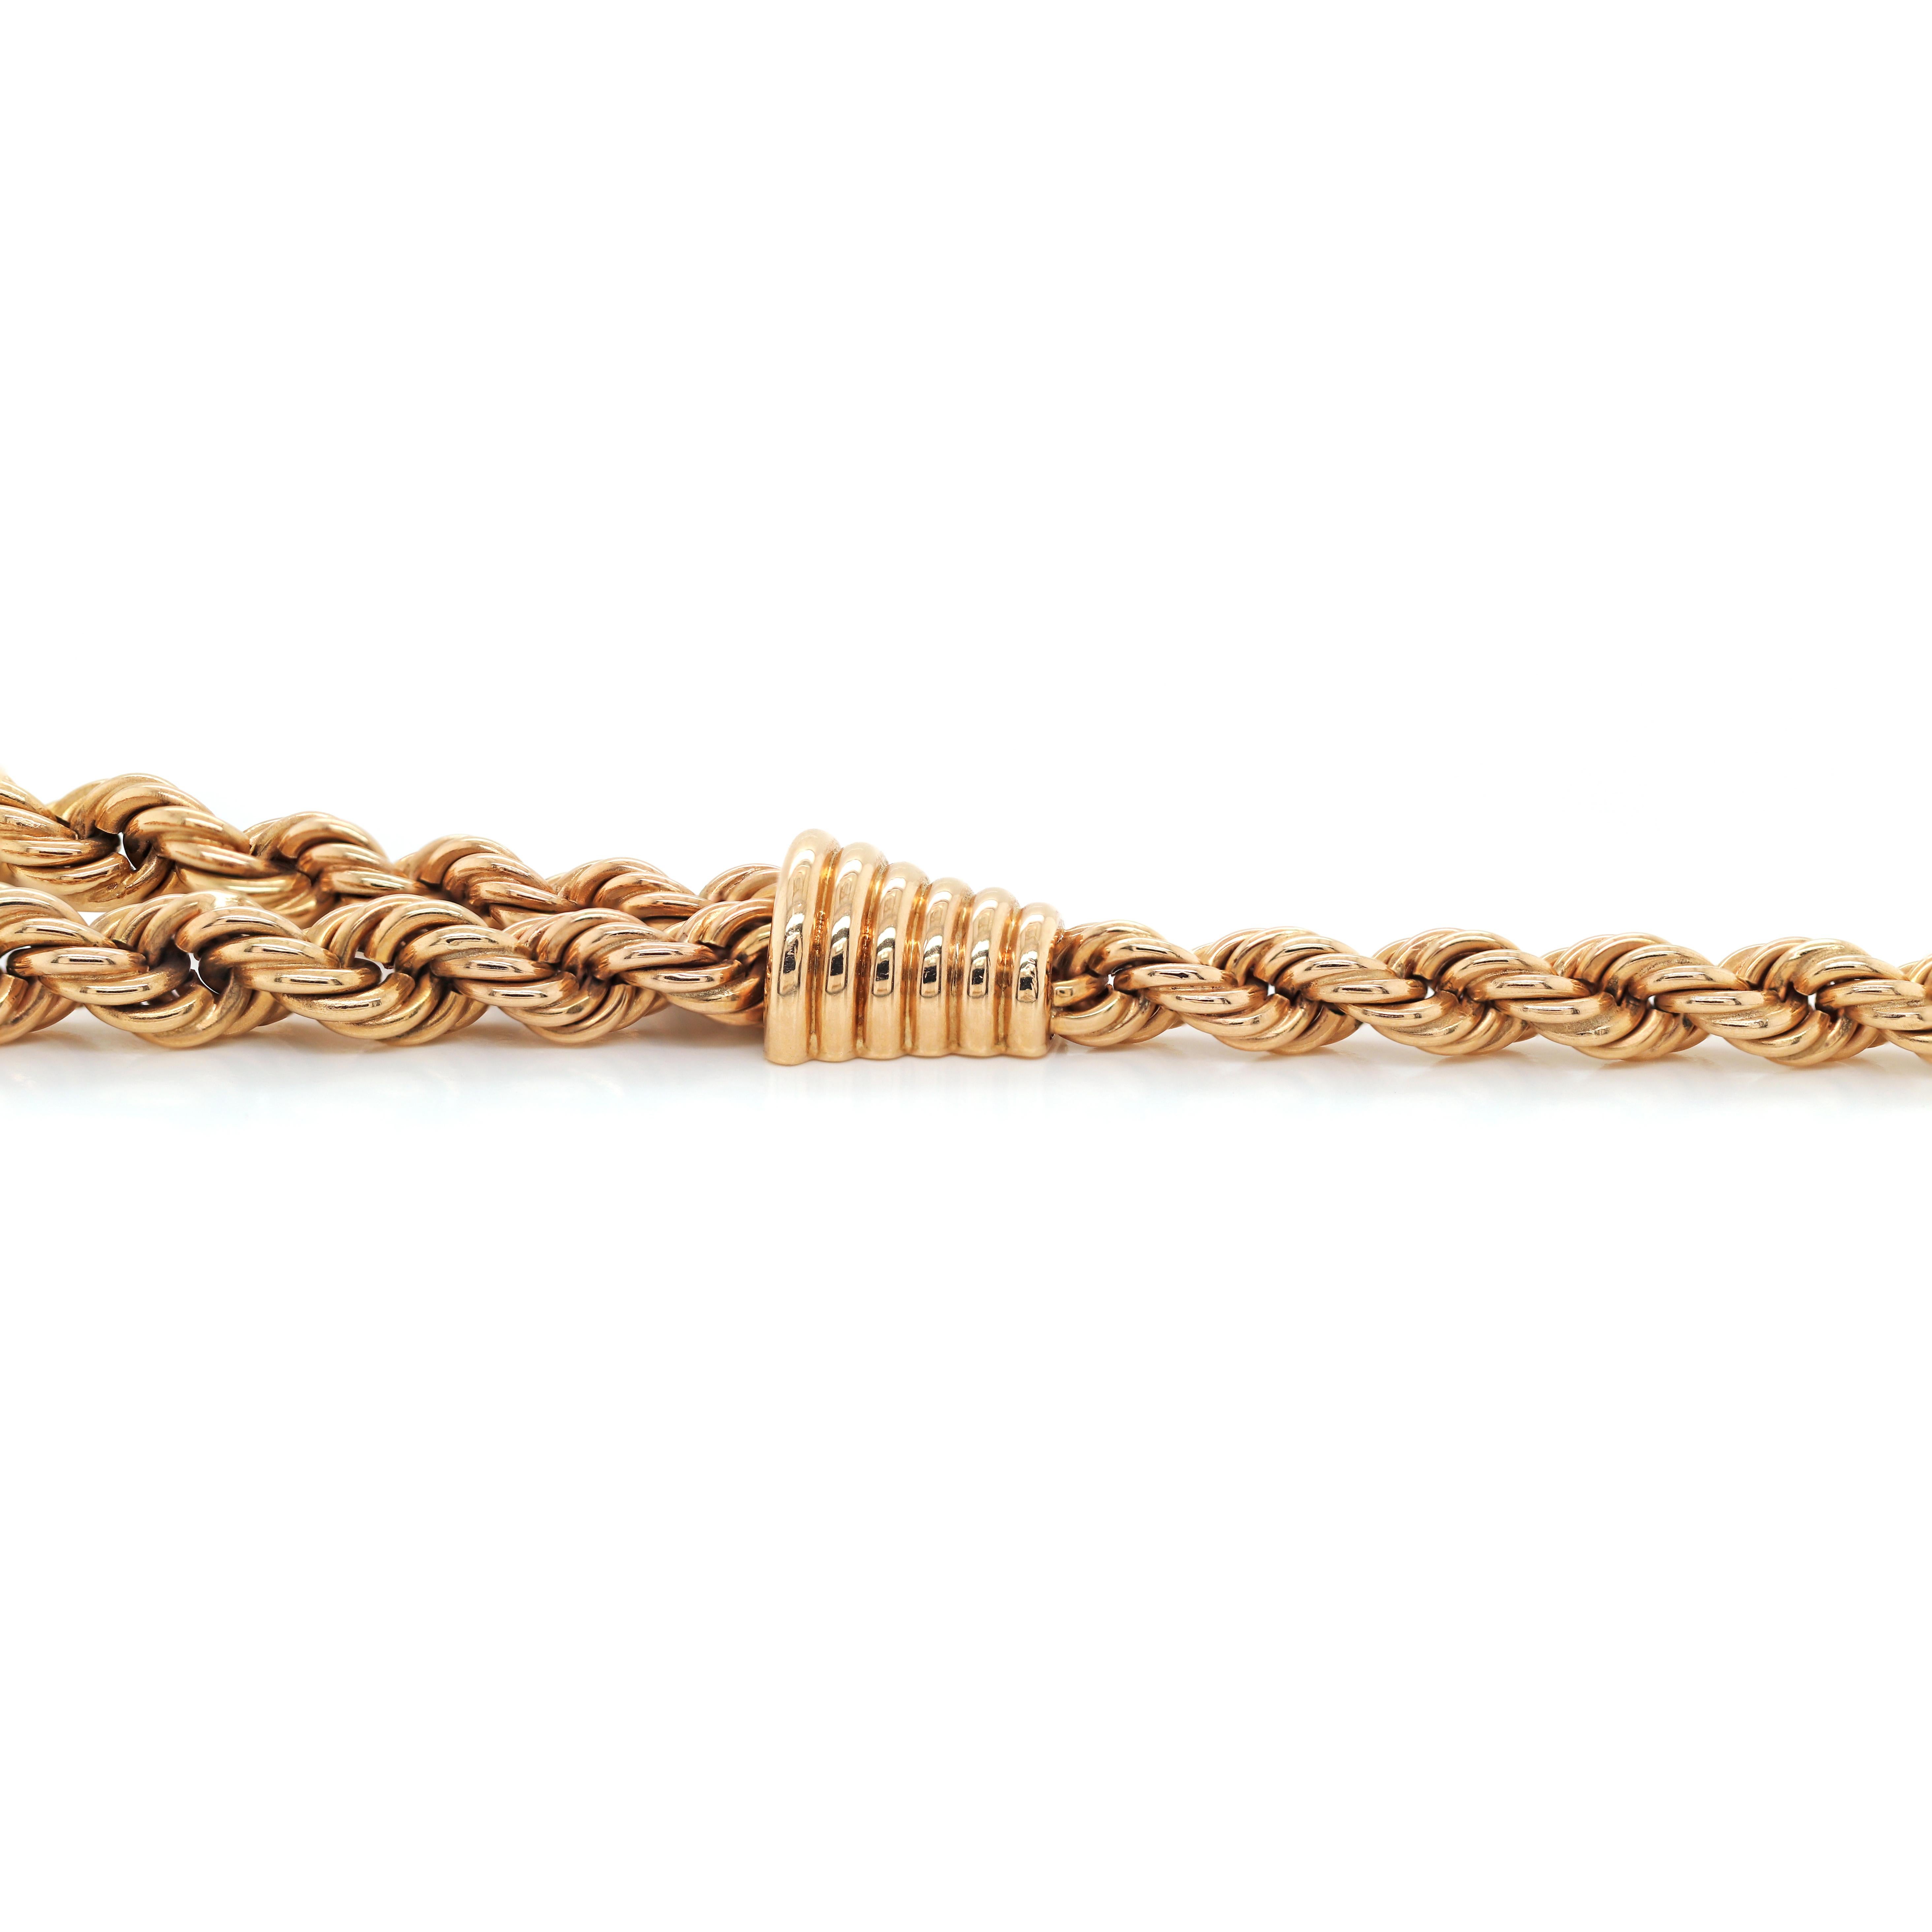 This unusual vintage necklace is a double row, 18 carat rose gold graduated rope chain connected by two ribbed cone design links onto a single rope chain. The necklace is finished with a secure bayonet fastening and safety catch and measures 16.5